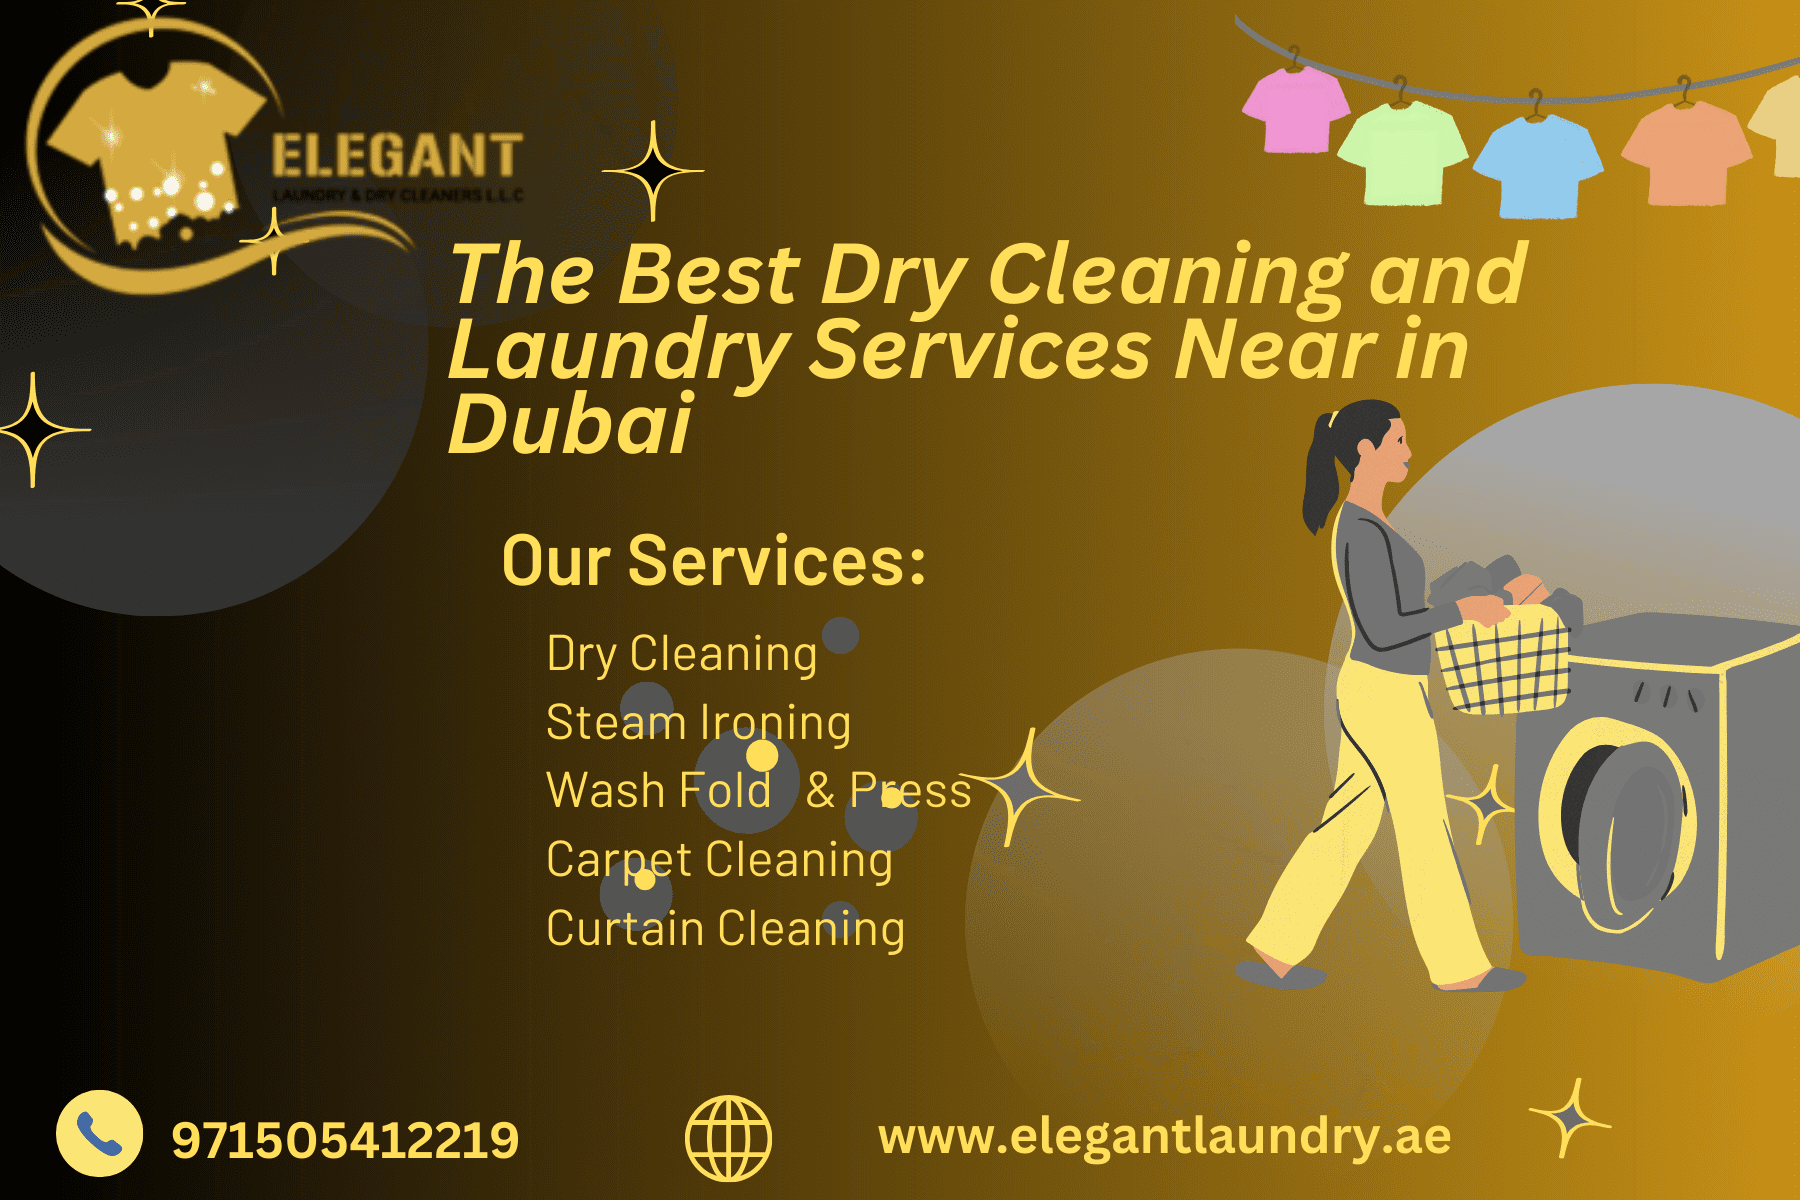 The Best Dry Cleaning and Laundry Services Near in Dubai 